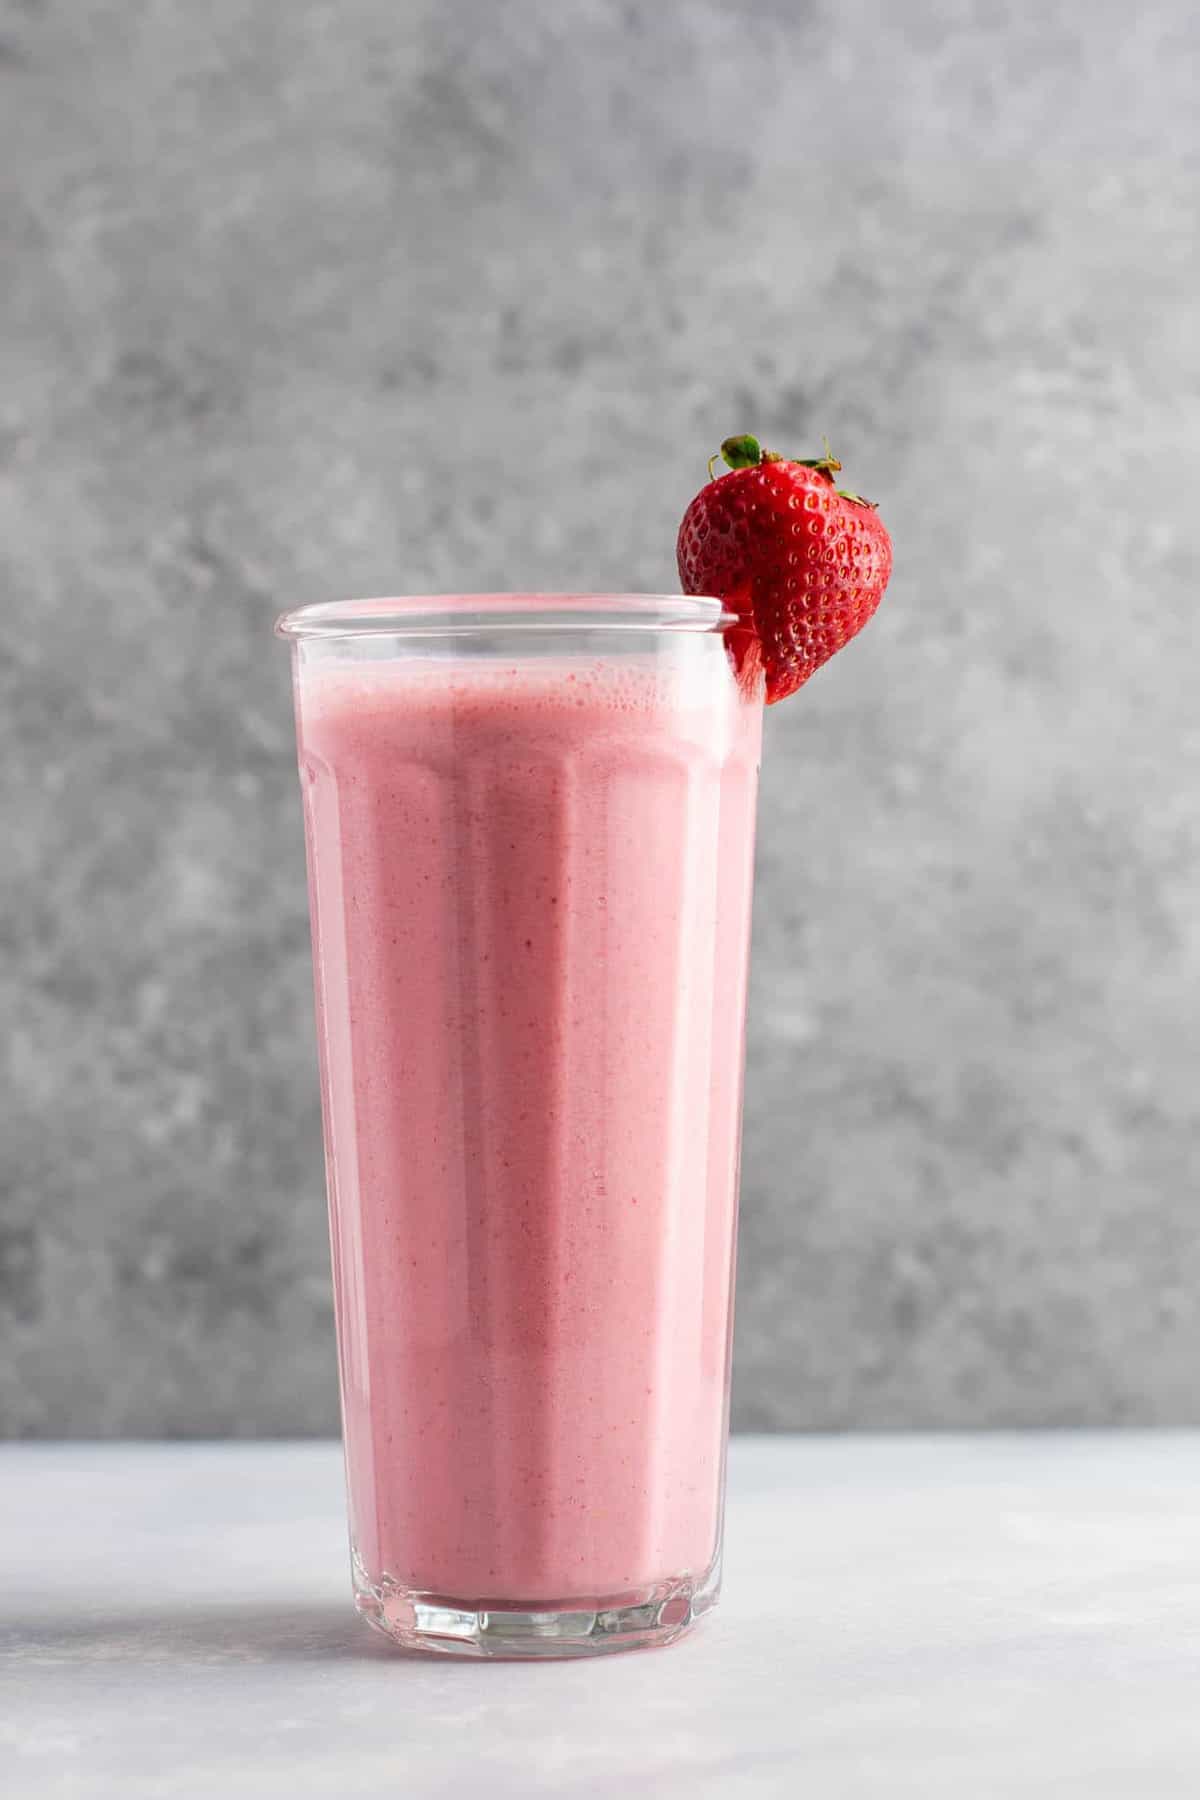 Strawberry smoothie in a tall glass with a strawberry on the rim